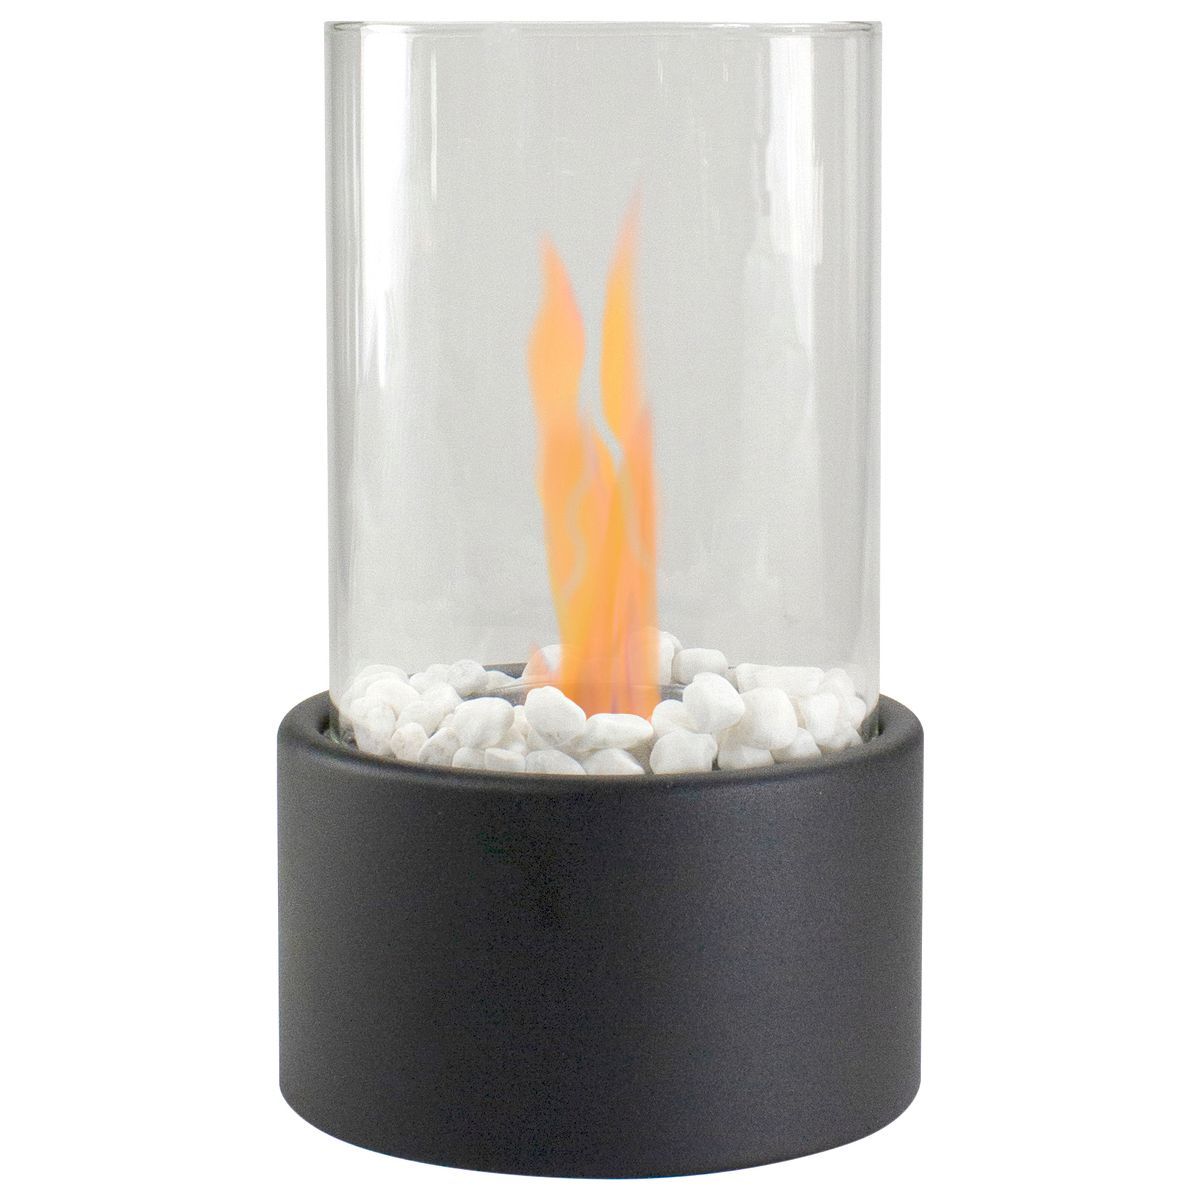 Northlight 10.5" Bio Ethanol Round Portable Tabletop Fireplace with Black Base | Target